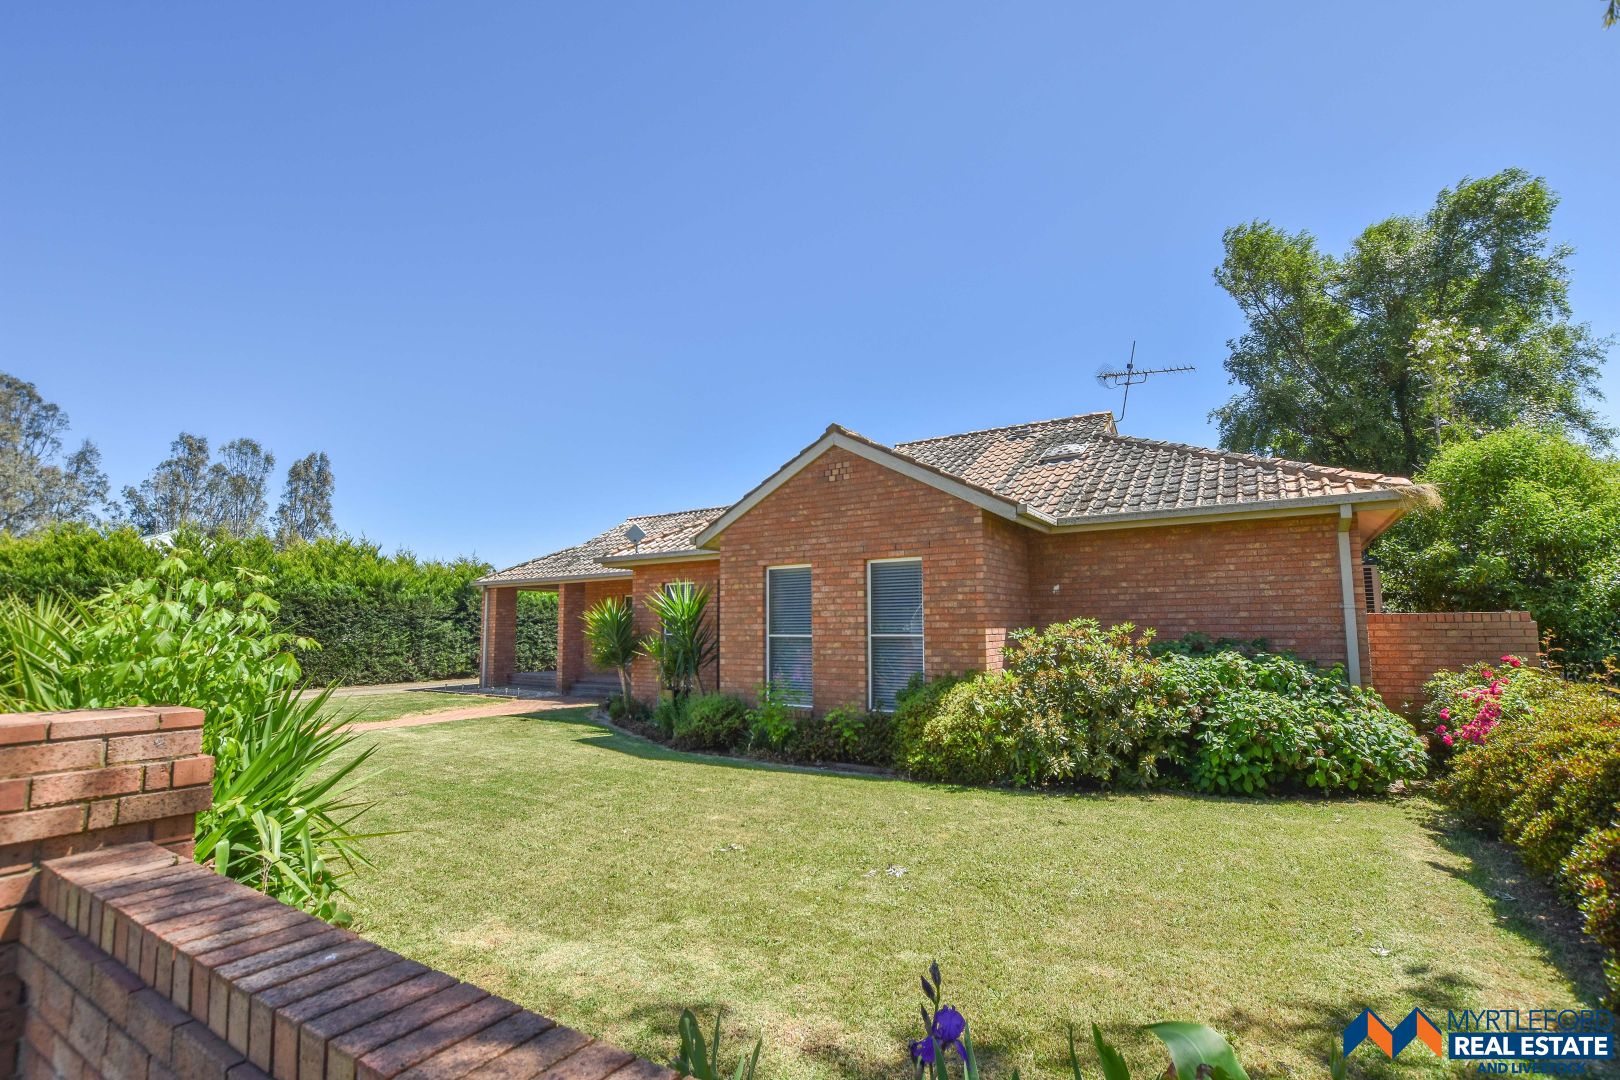 36 Lower River Road East, Gapsted VIC 3737